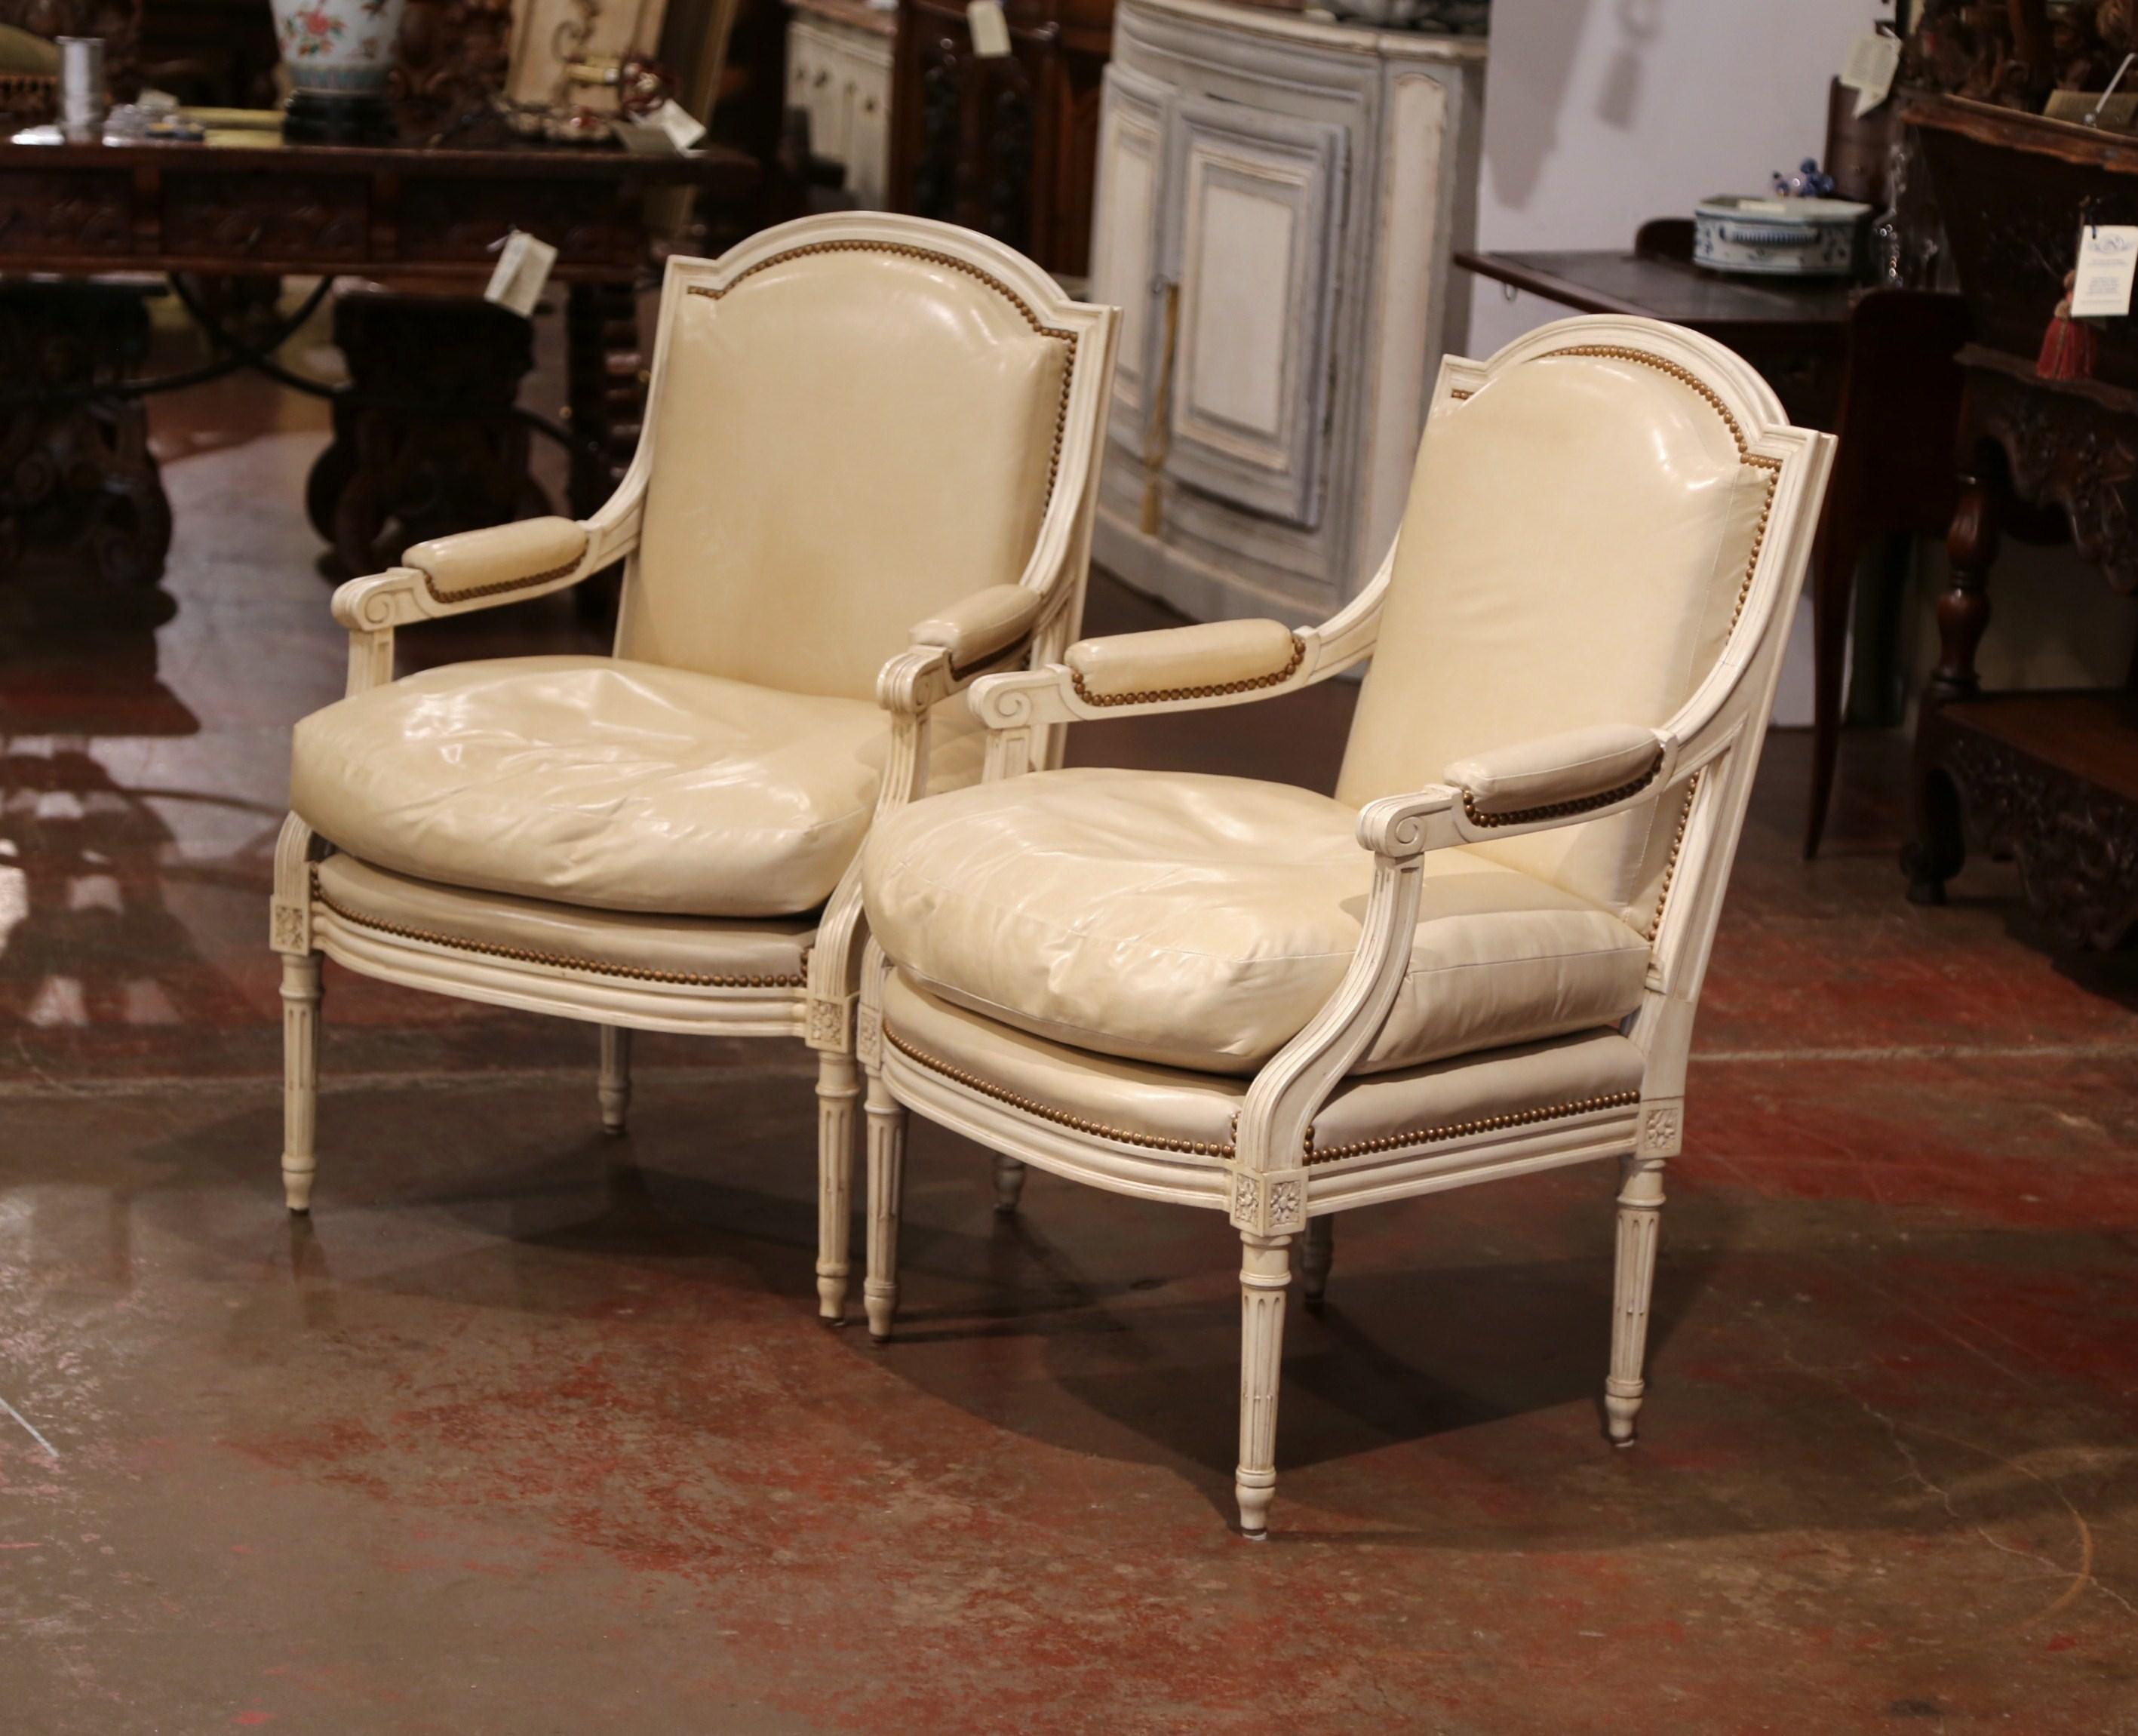 Place this elegant pair of upholstered, versatile fauteuils in your study or library for comfortable yet chic seating. Crafted in France, each armchair reflects the ornate Louis XVI style features hand carved tapered legs, an arched back and padded